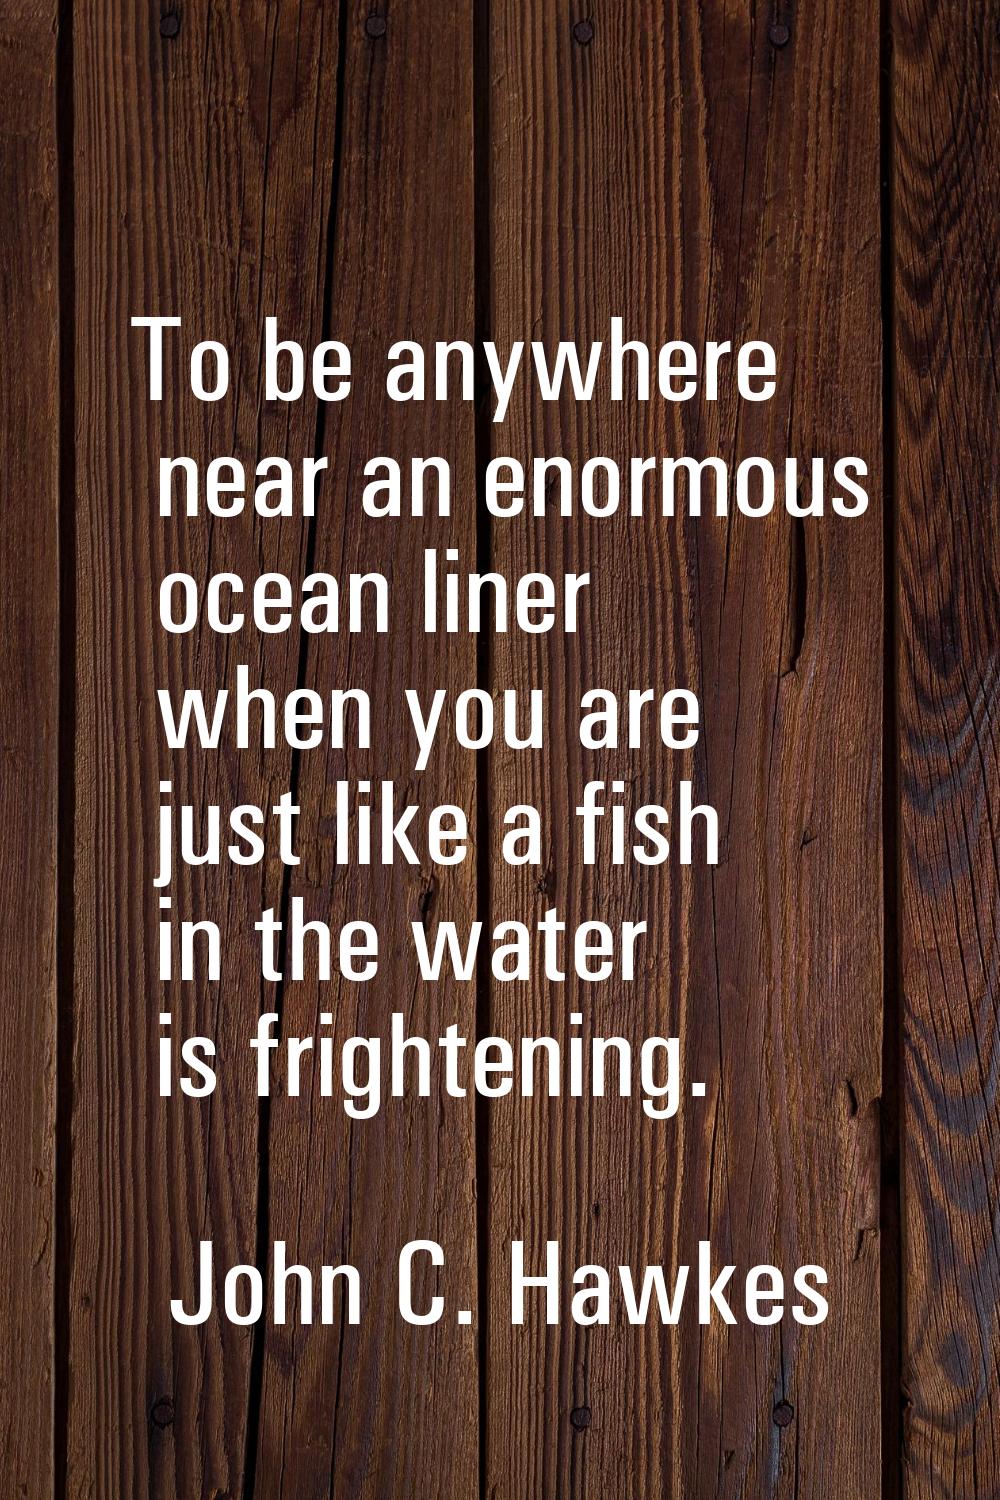 To be anywhere near an enormous ocean liner when you are just like a fish in the water is frighteni